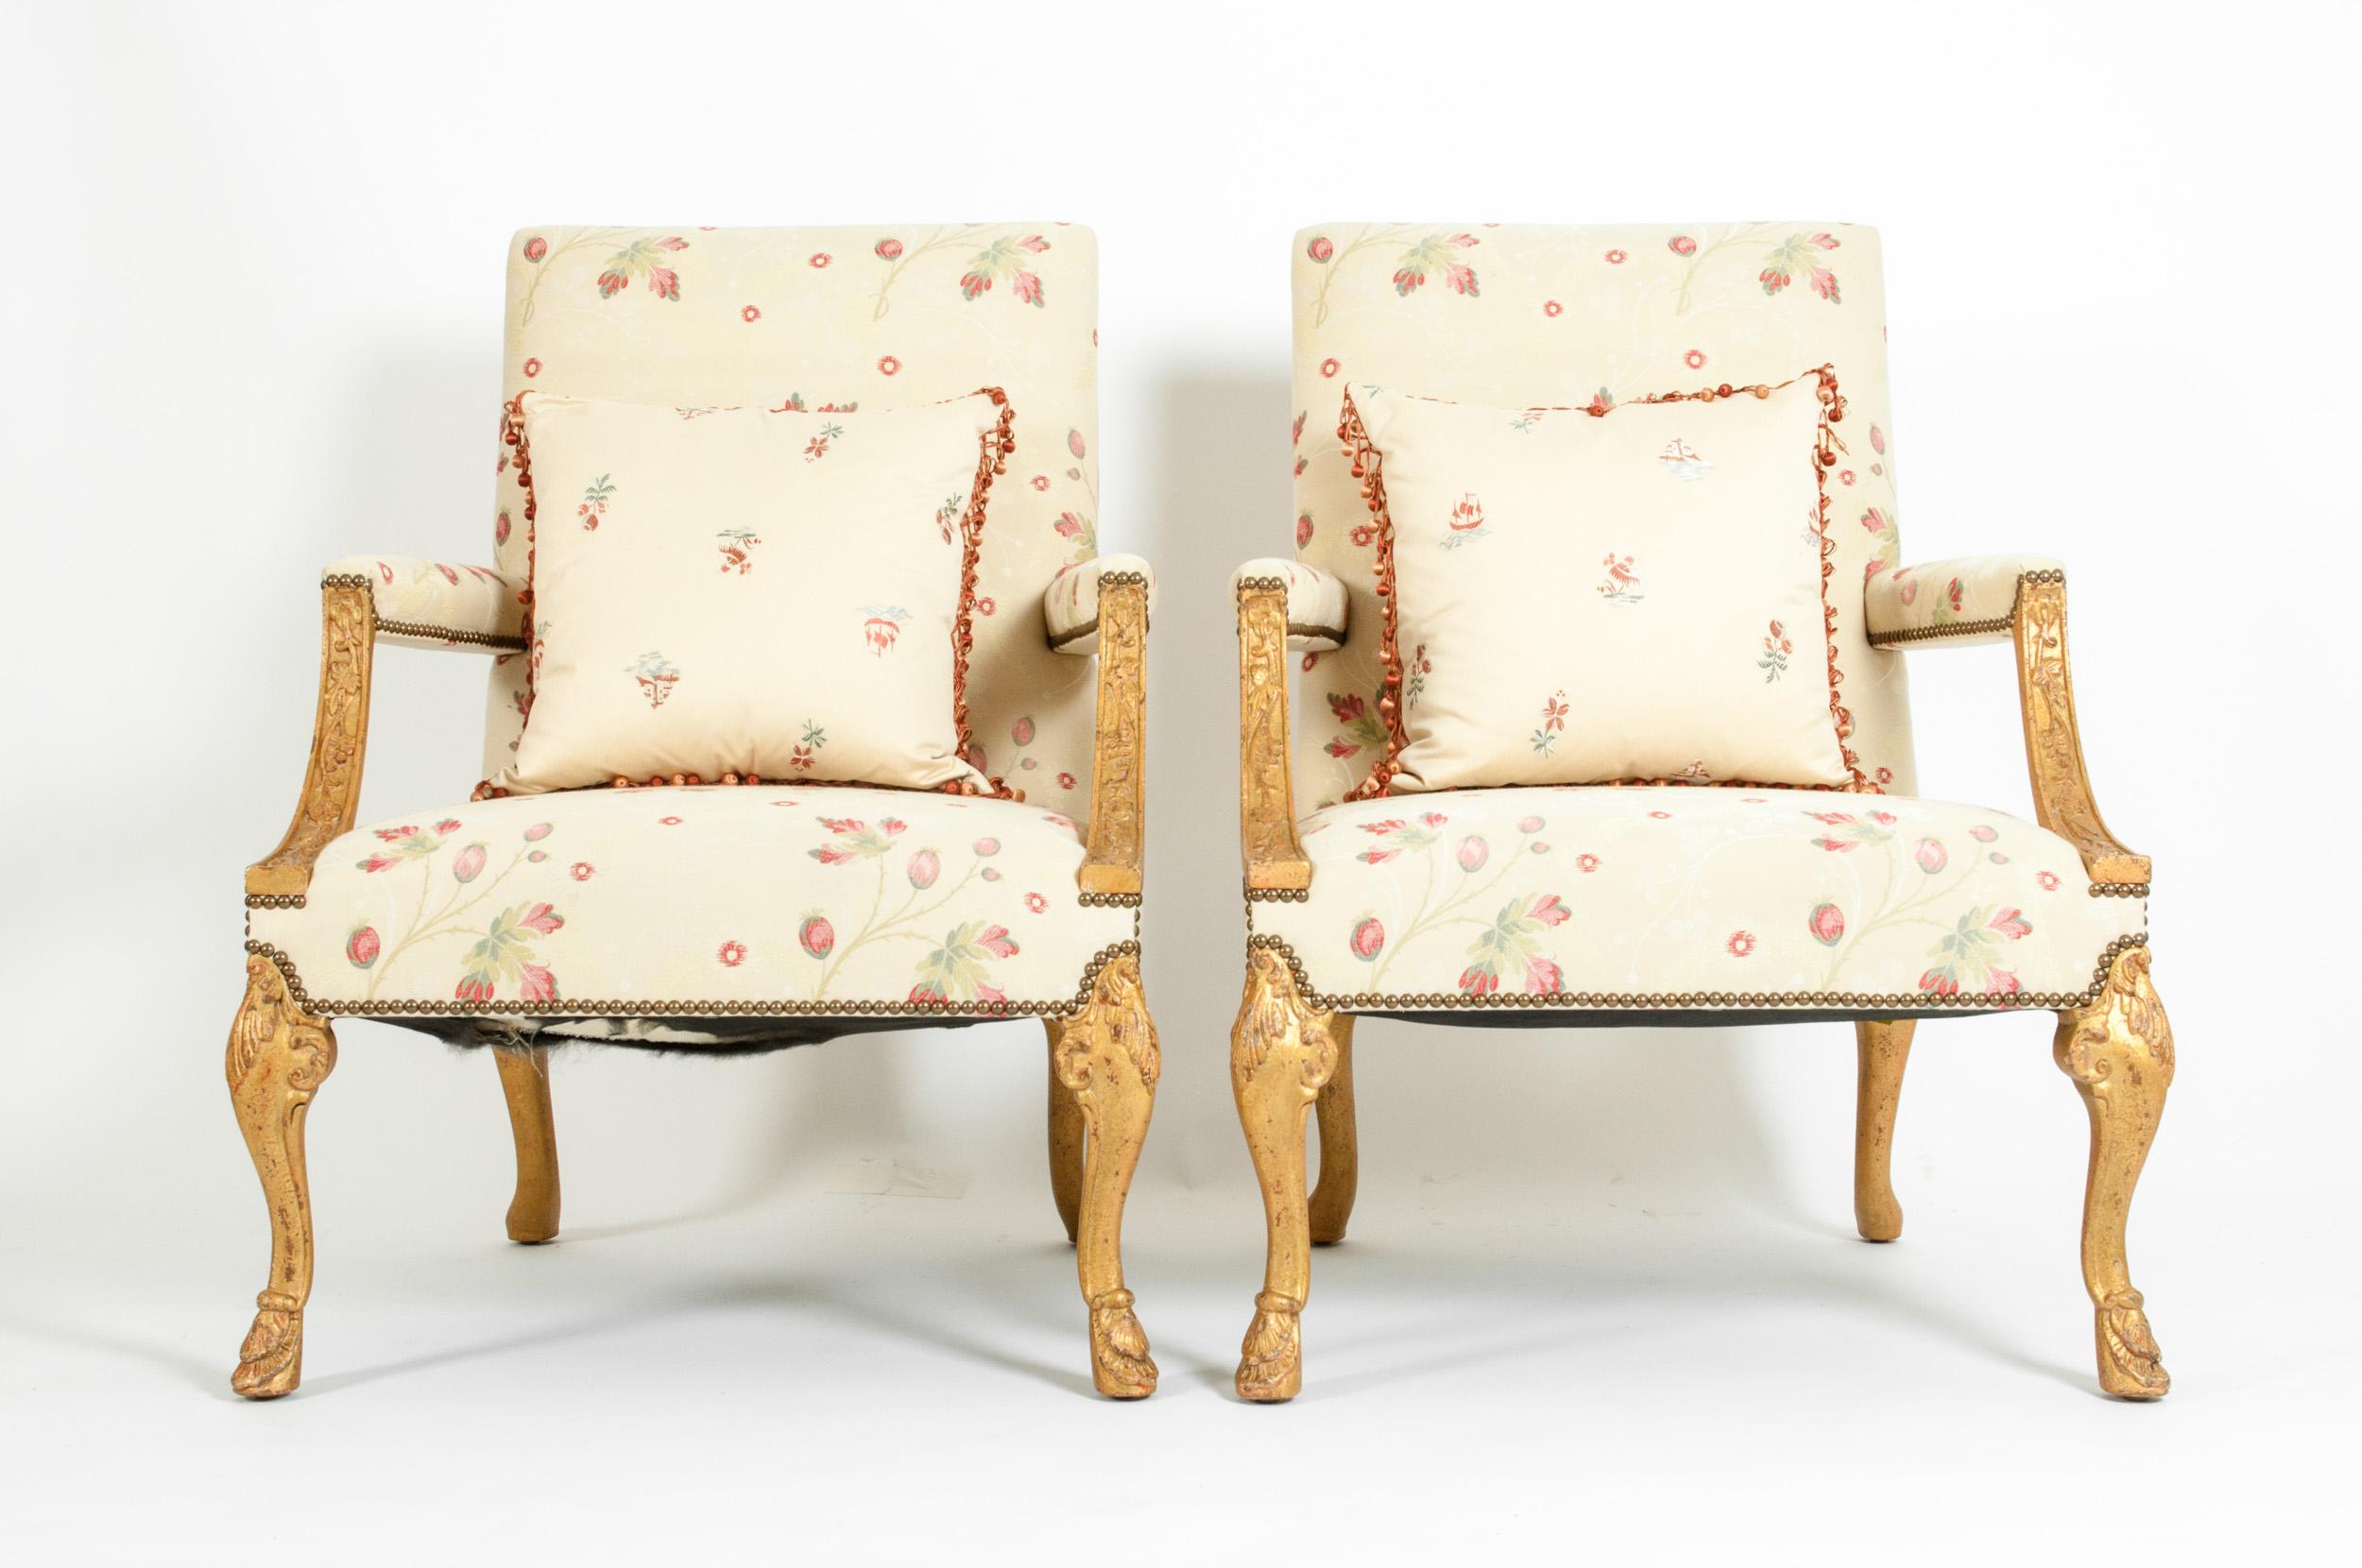 Pair of mid-20th century pair giltwood frame George II style side / library armchairs with square back and vine arms on foliate carved cabriole legs. Each chair is in excellent vintage condition with age / use appropriate wear. The upholstery is